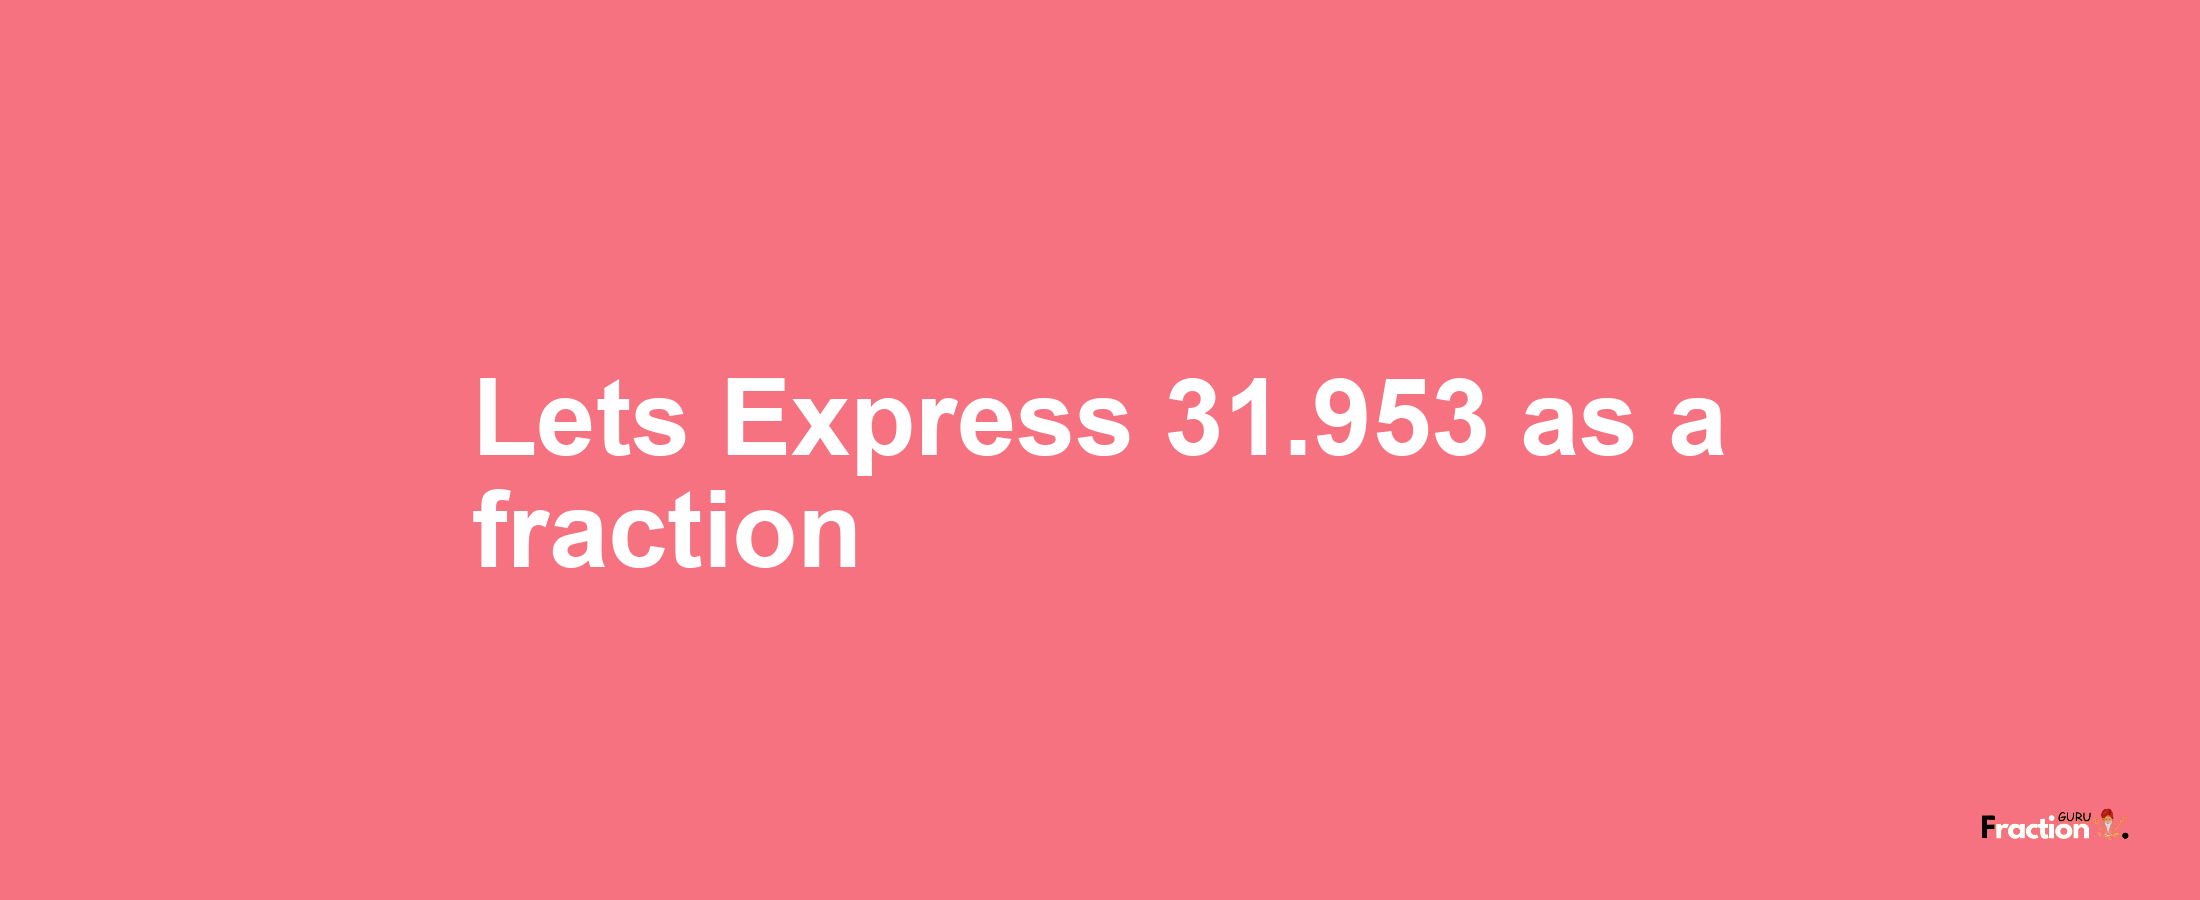 Lets Express 31.953 as afraction